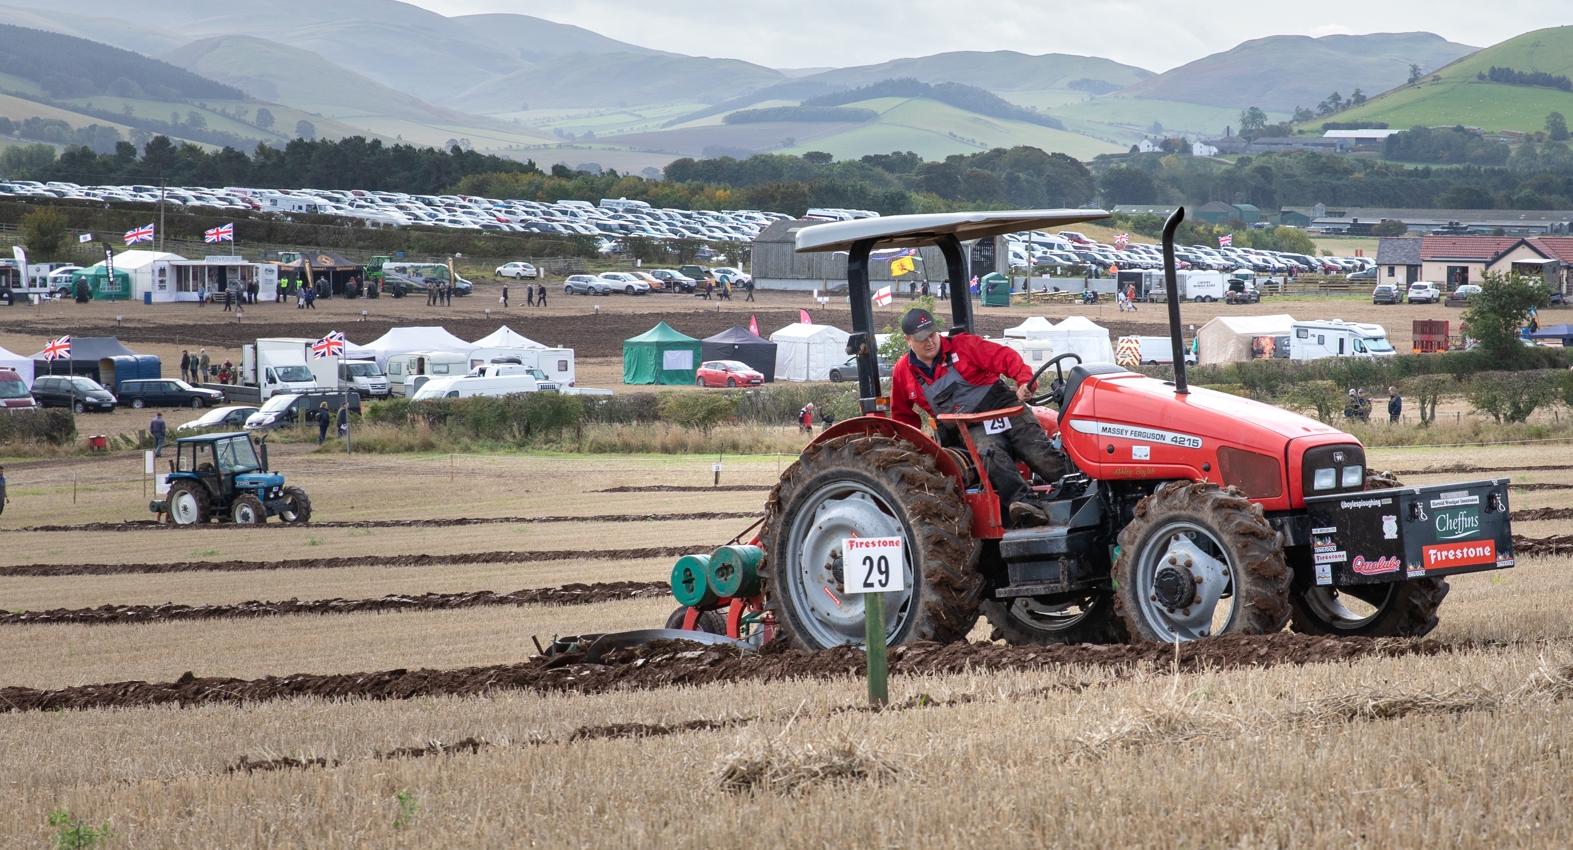 Round up of this year's British National Ploughing Championships